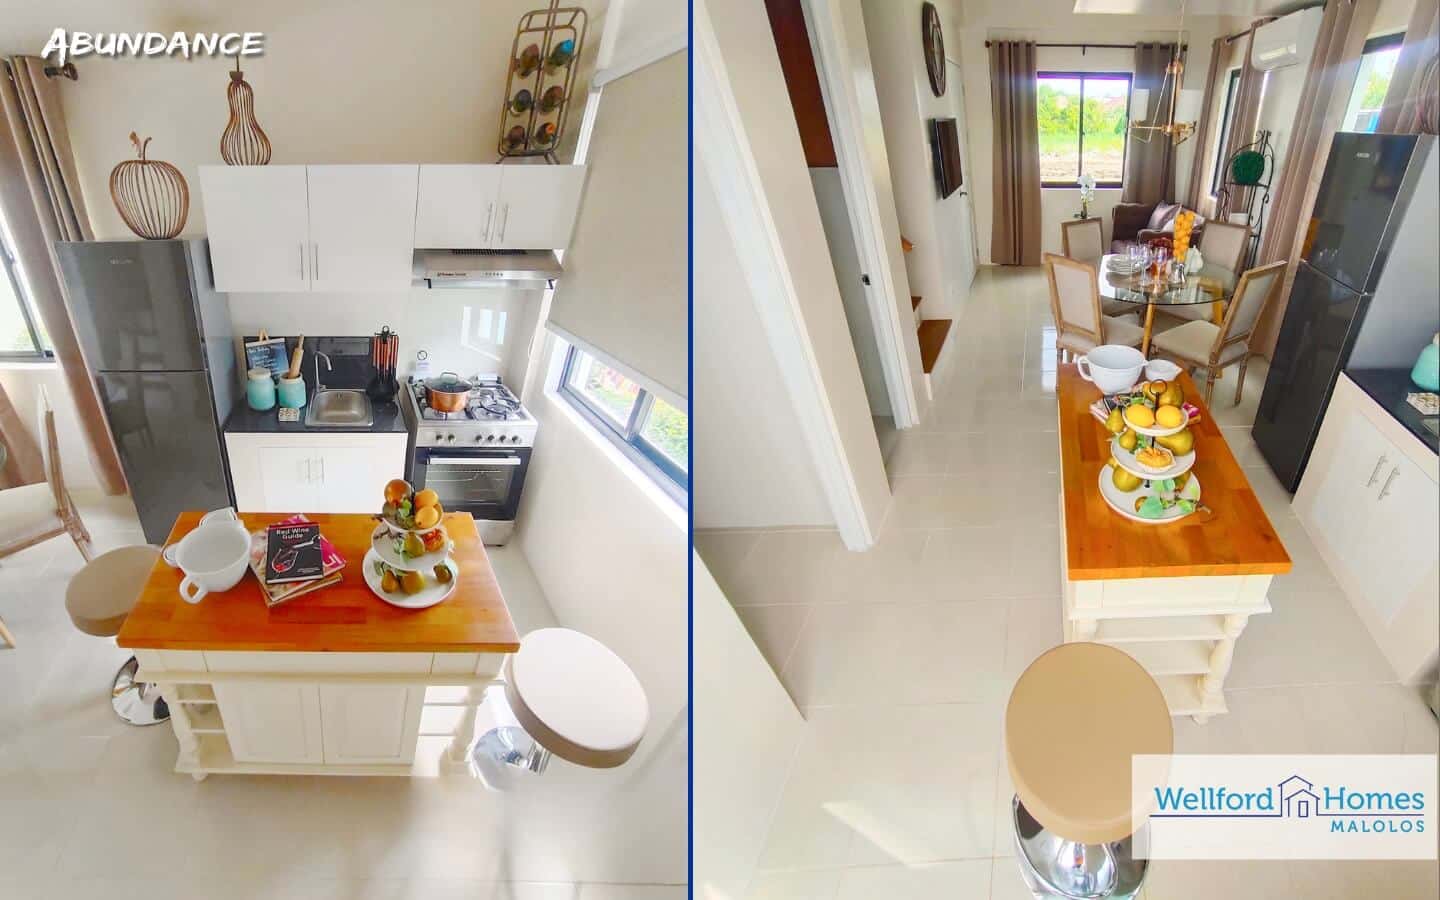 Wellford Homes Malolos Breakfast nook and kitchen